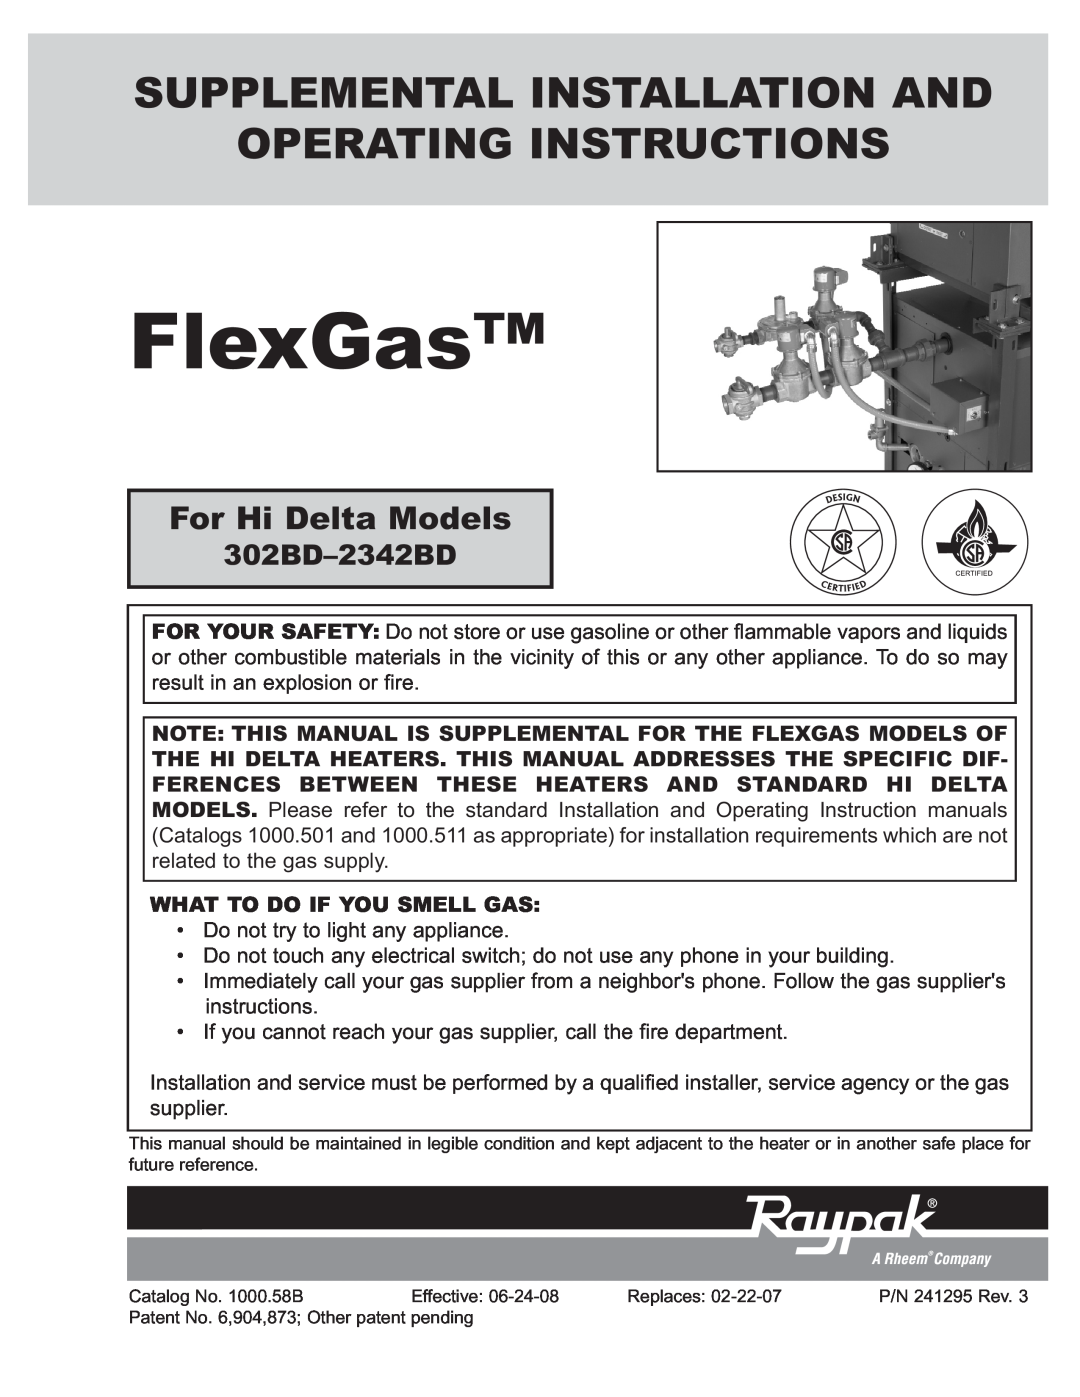 Raypak 302BD-2342BD instruction manual For Hi Delta Models, What To Do If You Smell Gas, FlexGas, Operating Instructions 